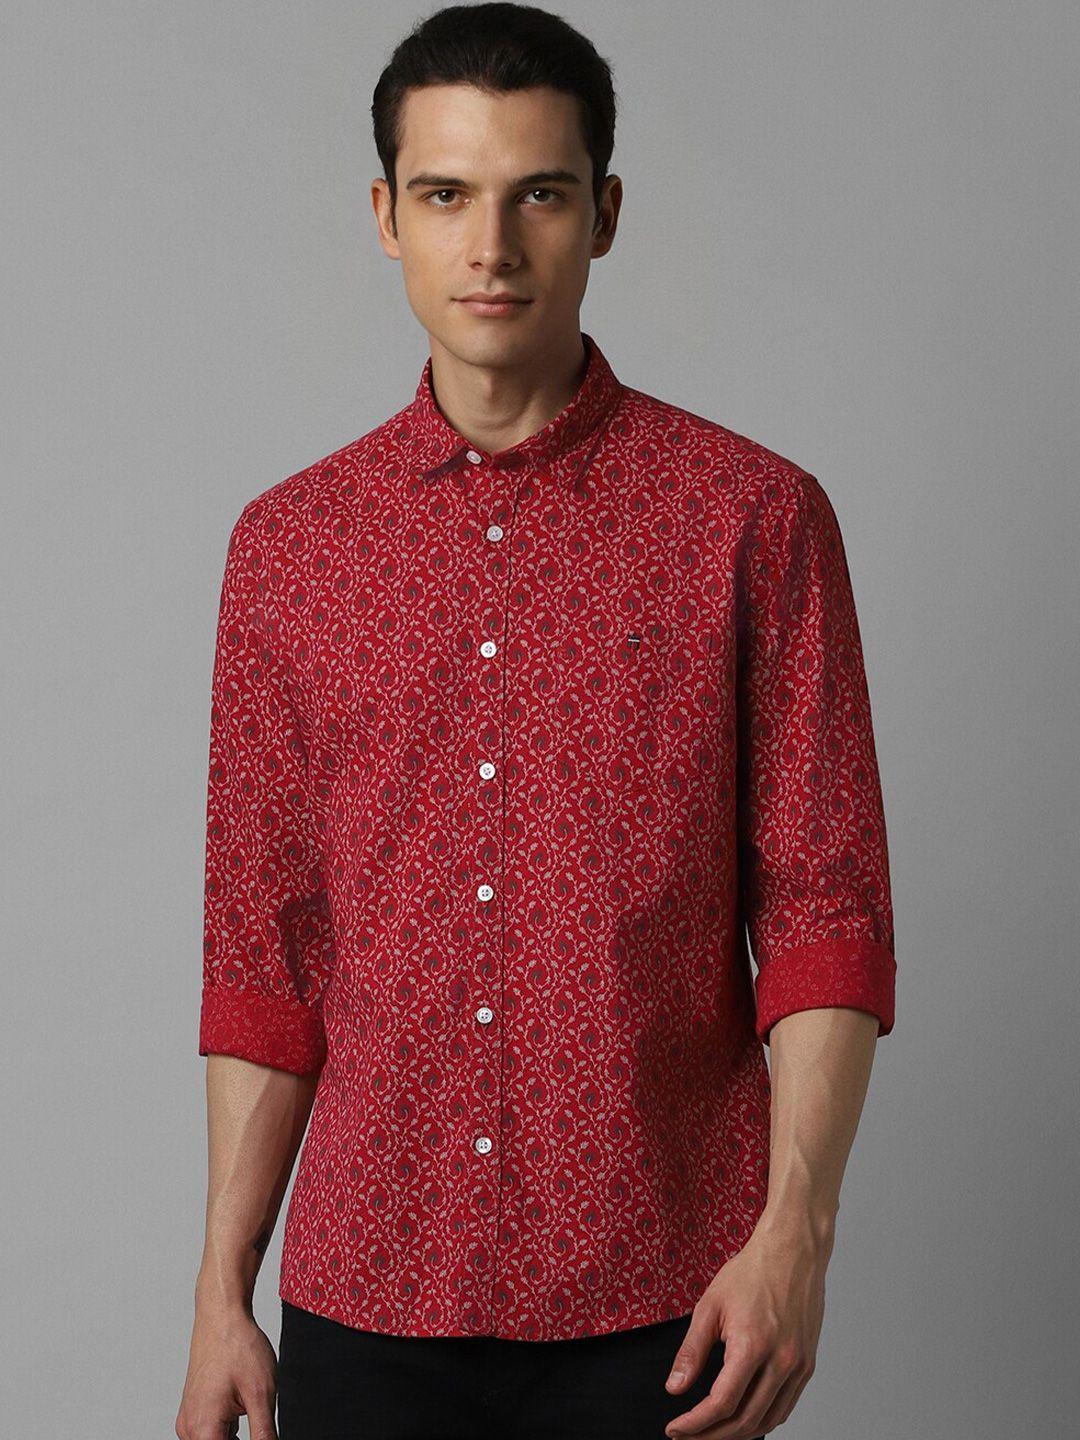 louis philippe jeans slim fit ethnic motifs printed cotton casual shirt